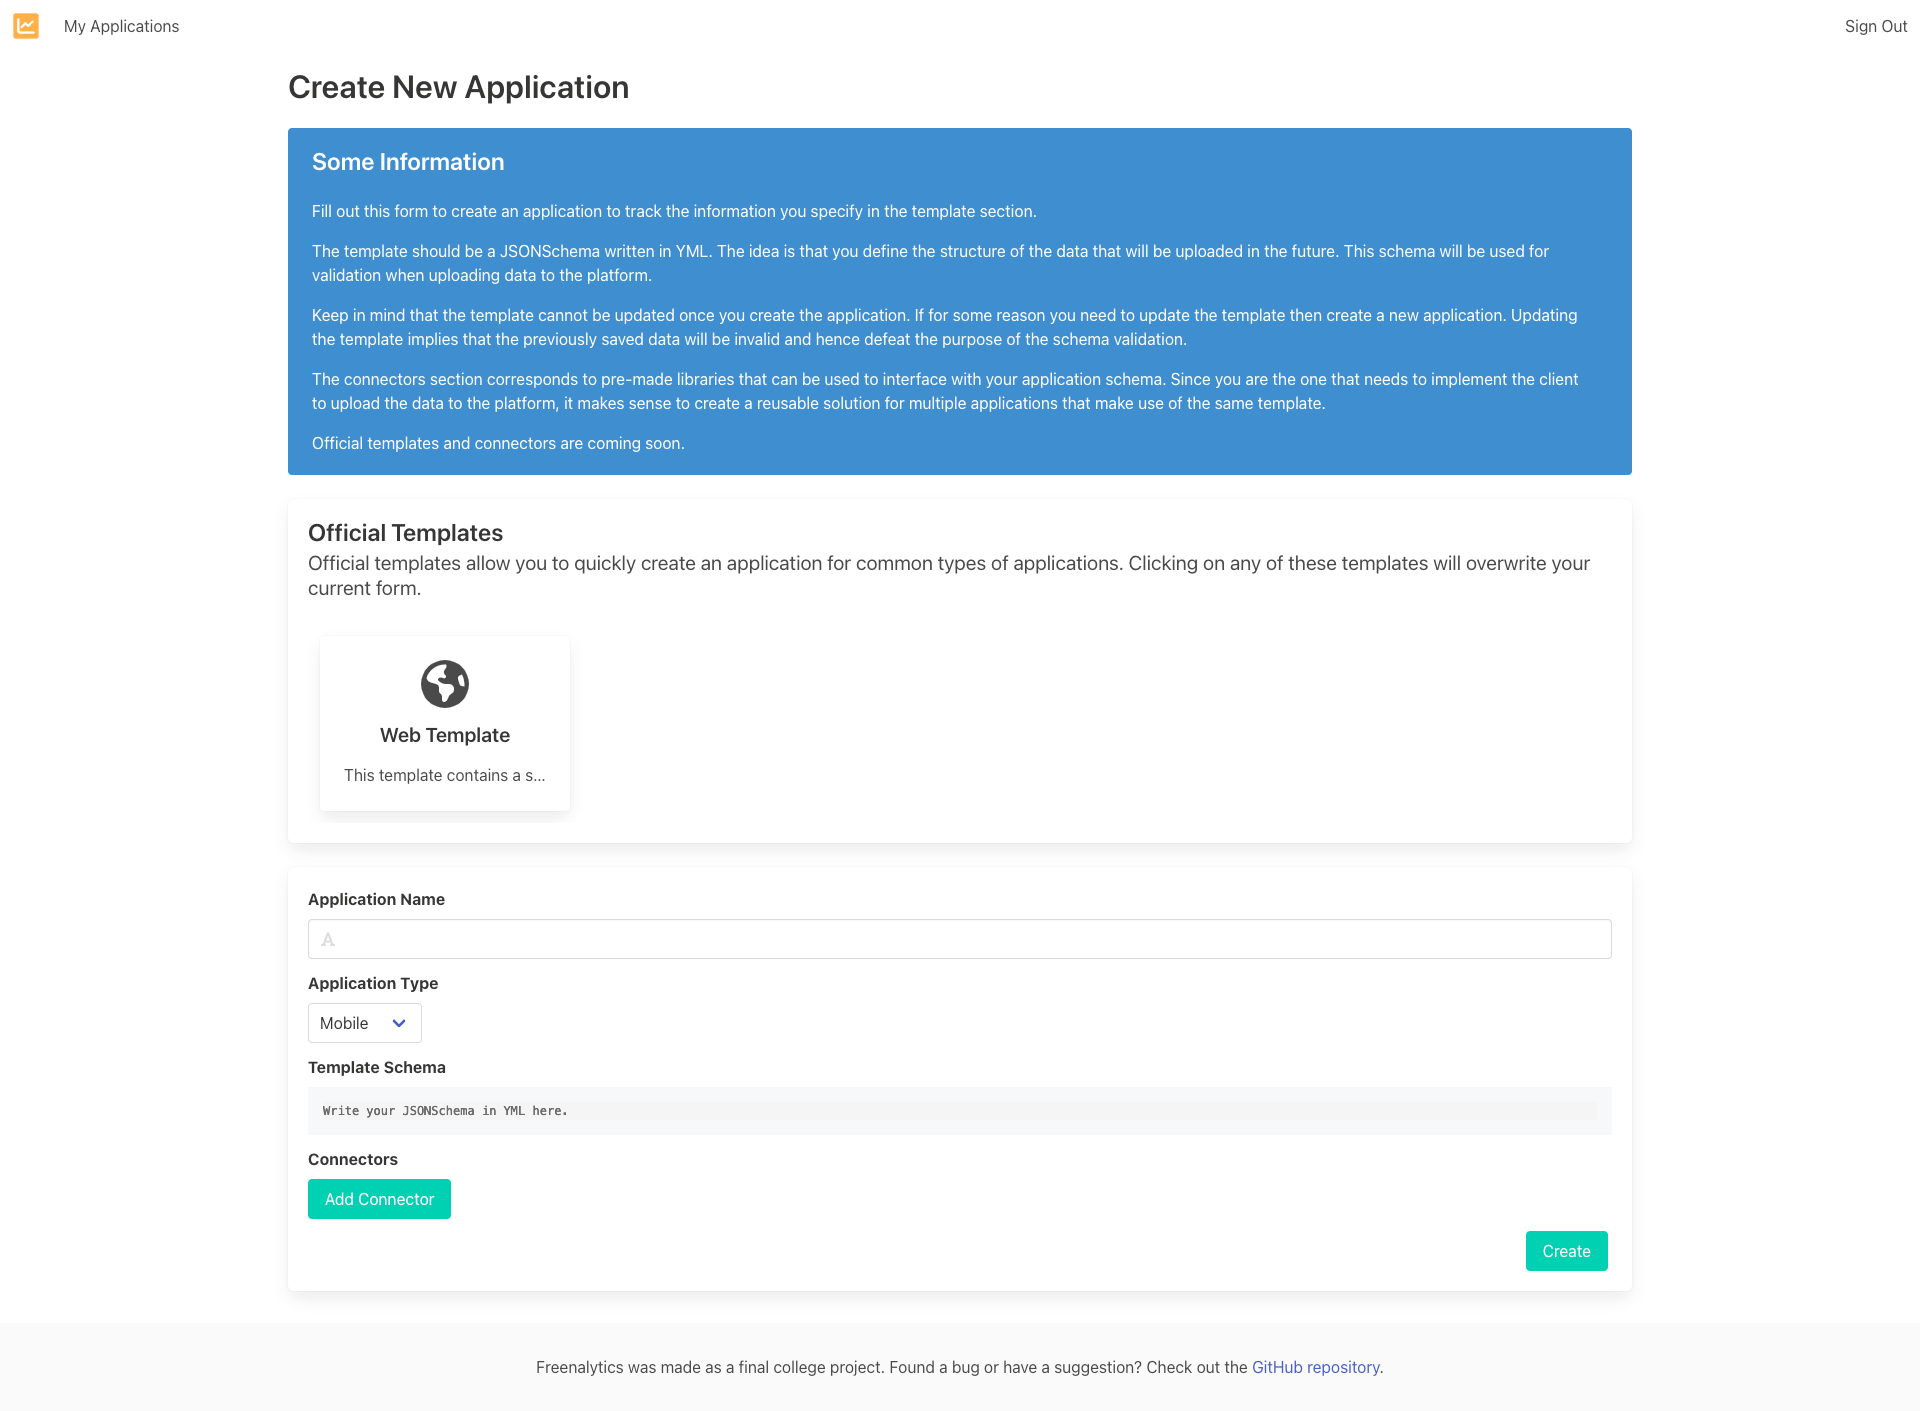 Here's how you can create an application.